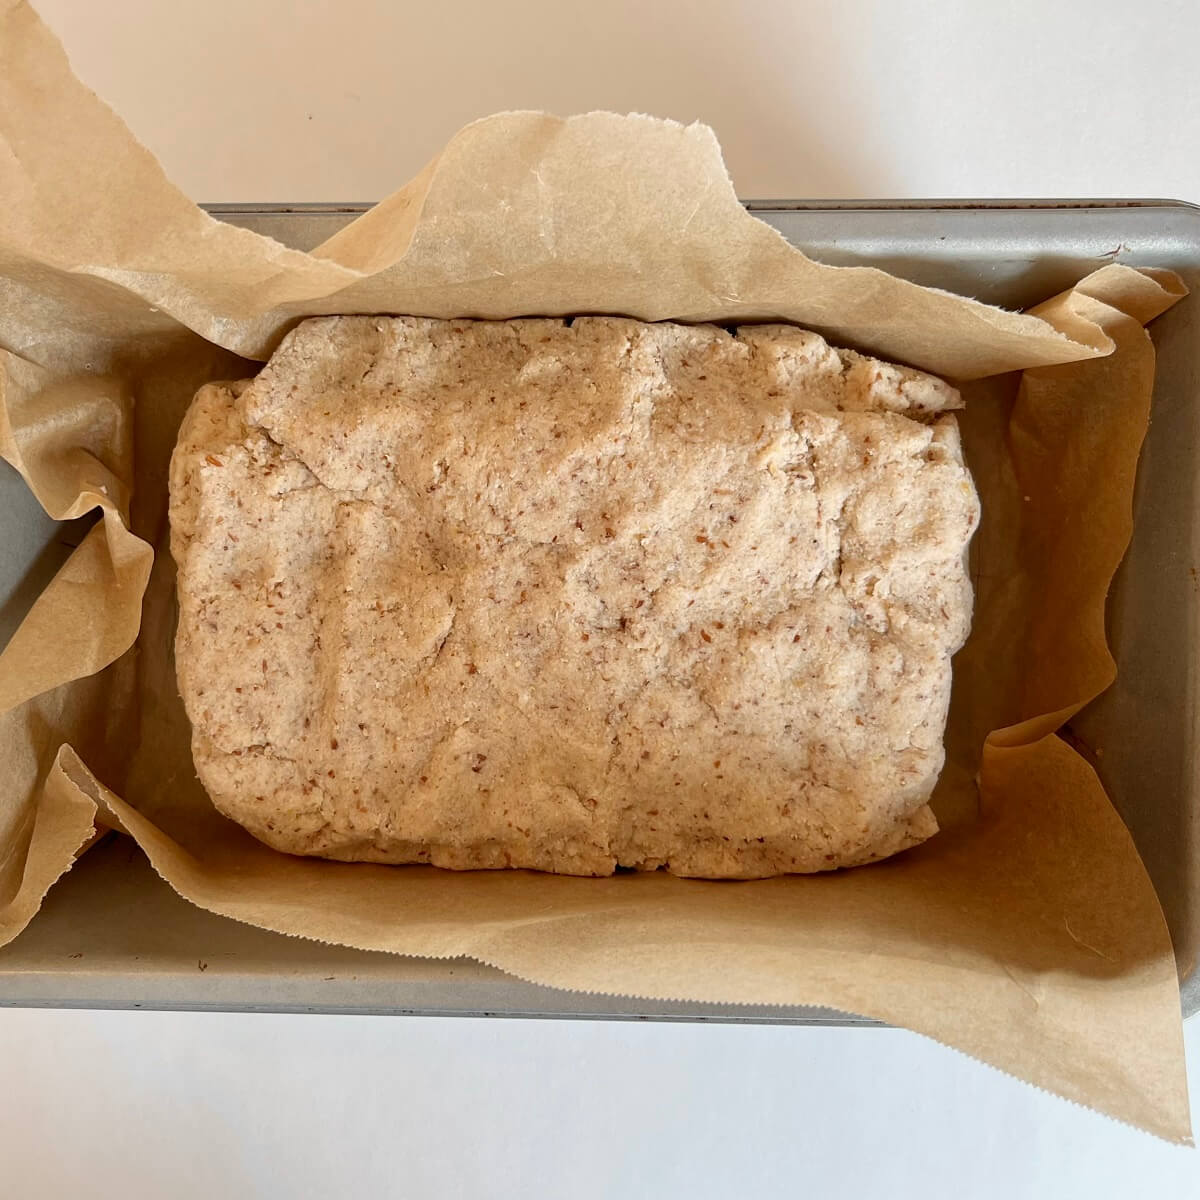 Raw bread dough in a metal loaf pan lined with parchment paper.